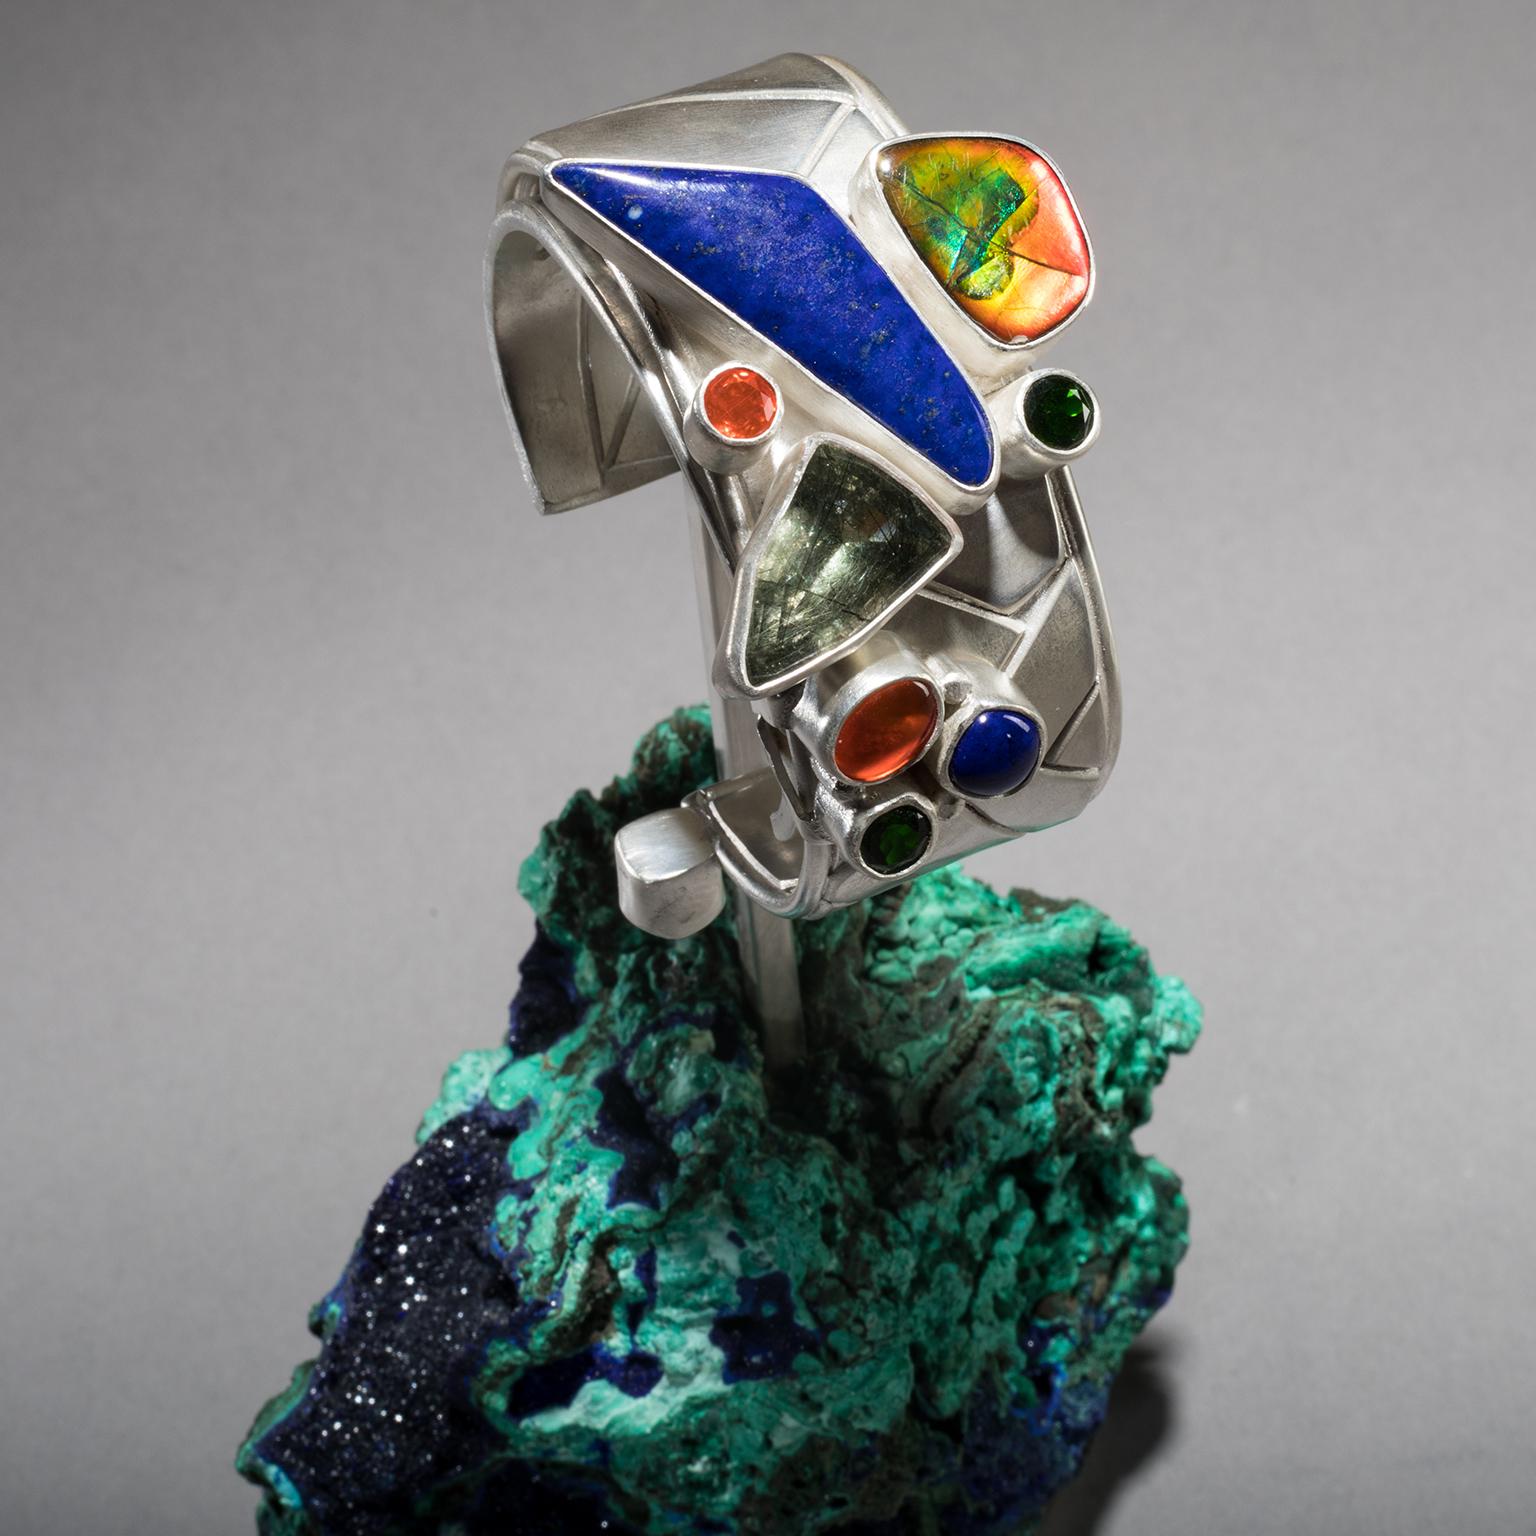 LAPIS CUFF ON AZURITE

A blade of midnight blue lapis lazuli slices boldly across a silver cuff in Studio Greytak’s Lapis Cuff on Azurite. Thought to guide the soul to heavenly contemplation, this bluest of blue stones has been part of some of